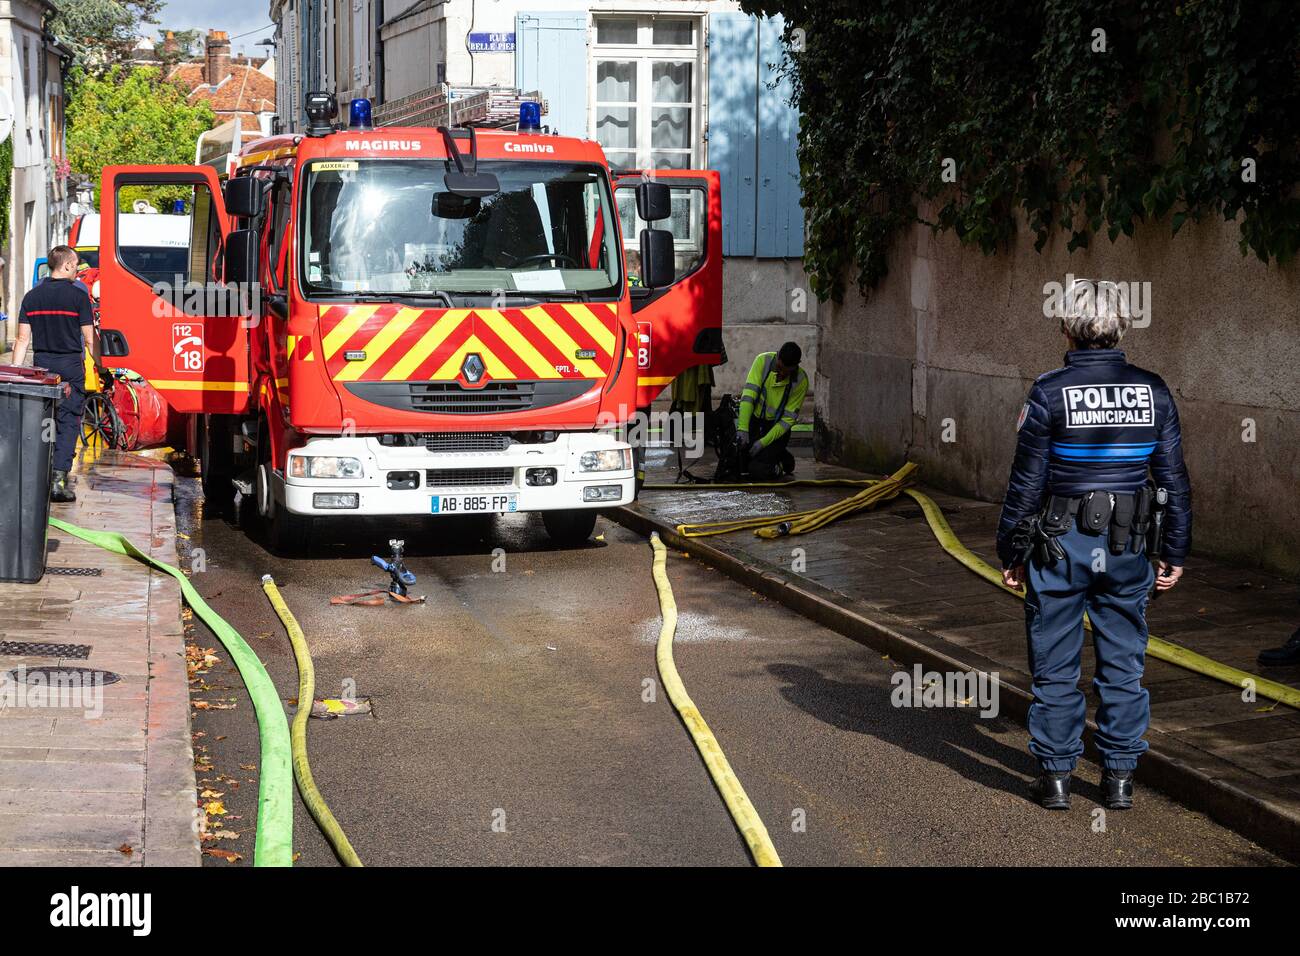 OFFICER FROM THE MUNICIPAL POLICE DURING AND INTERVENTION FOR AN APARTMENT FIRE IN THE CITY CENTER, FIREFIGHTERS FROM THE EMERGENCY SERVICES, AUXERRE, YONNE, FRANCE SPPF5199.jpg Stock Photo